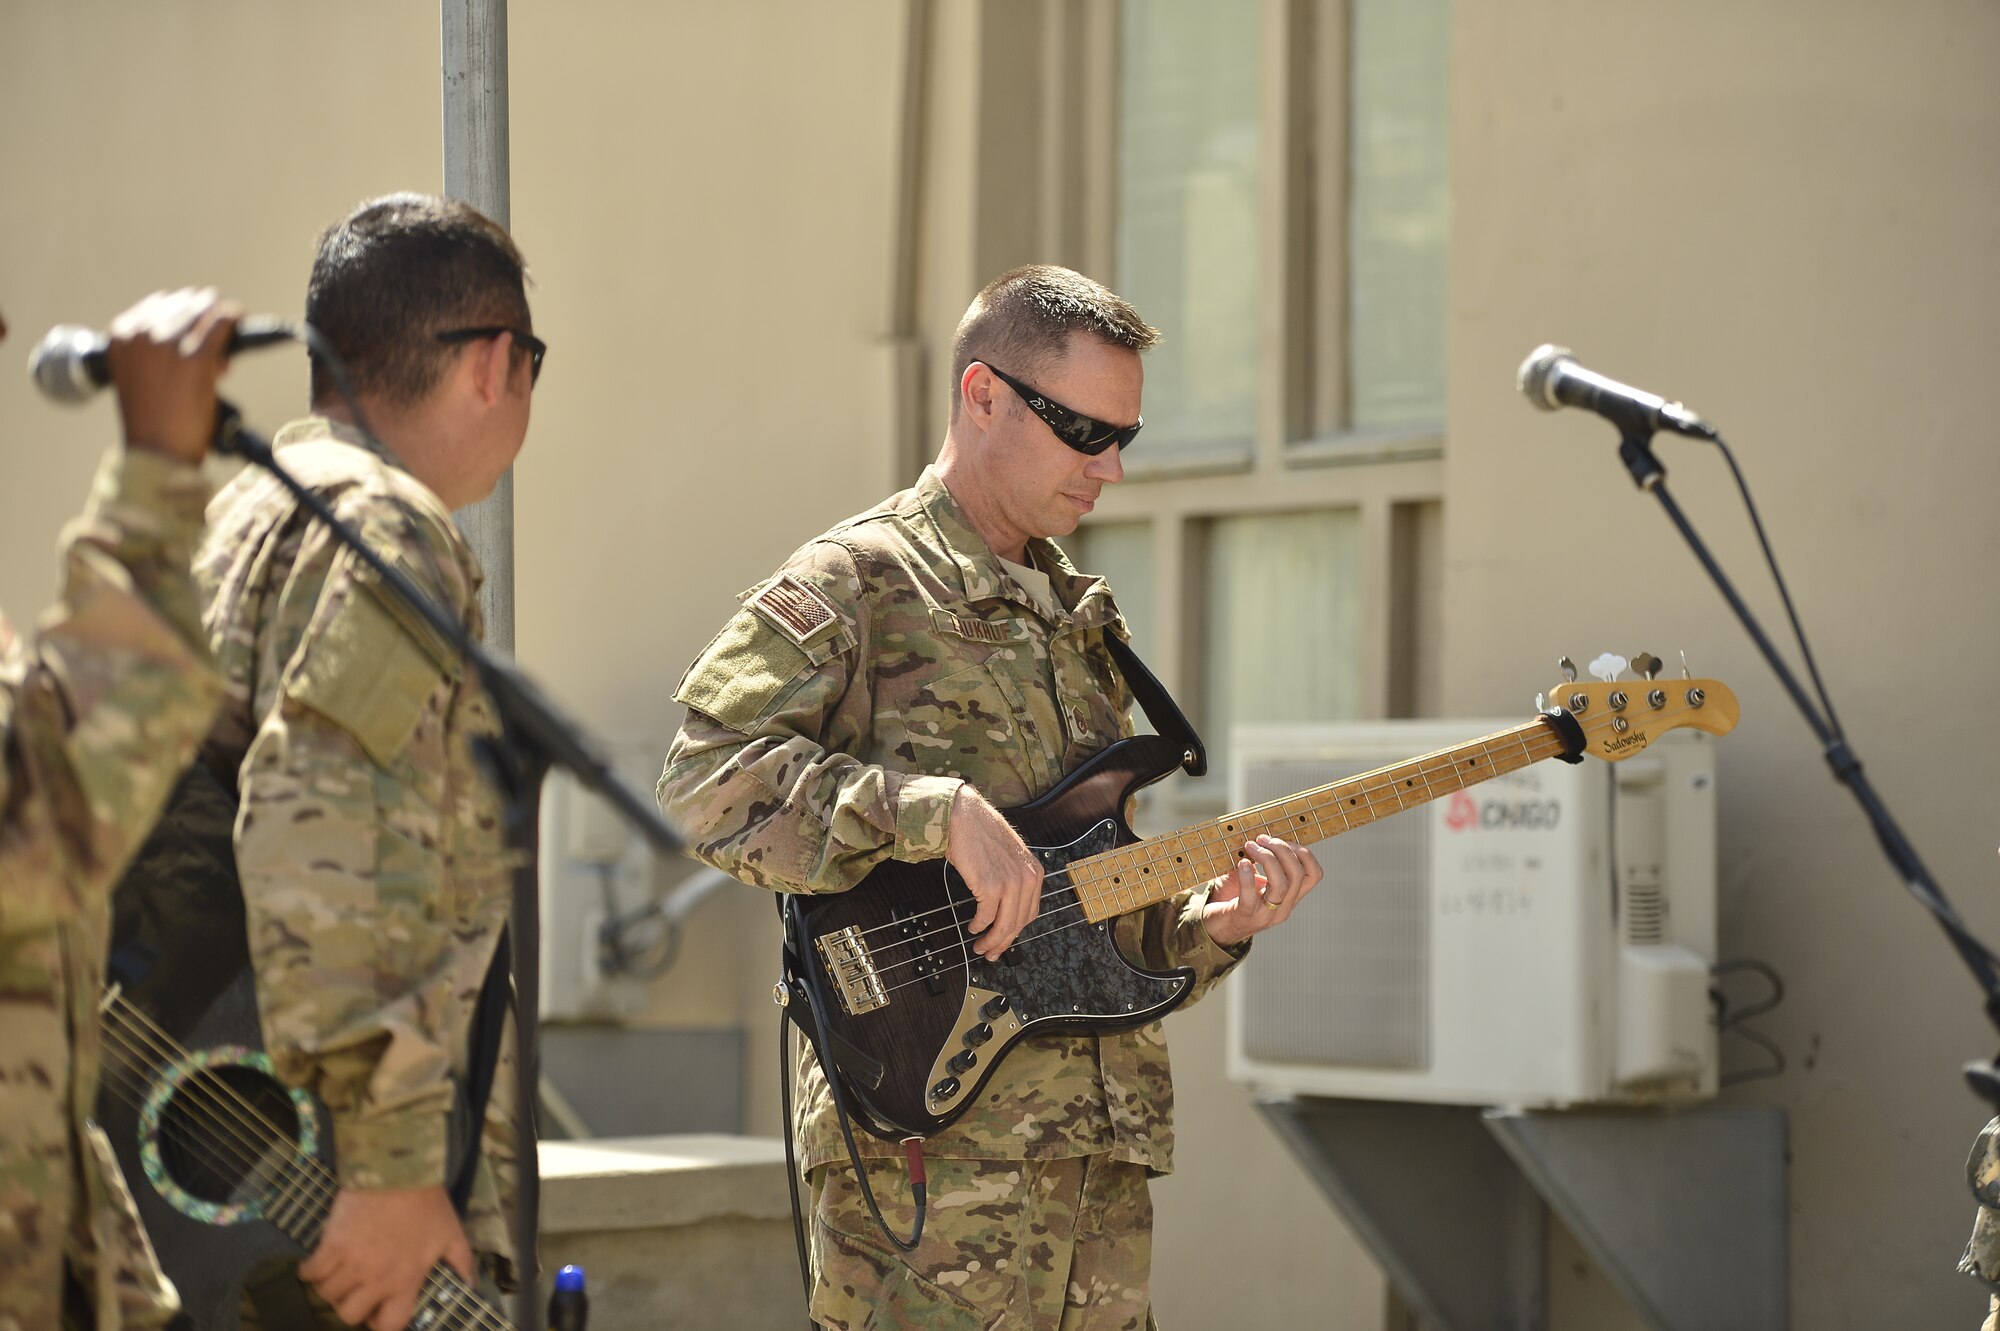 Master Sgt. Jeremy Laukhuf, Air Force Central Command Band NCO in charge, leads while performing for the Joint Combat Casualty Research Team at Bagram Air Base, April 11, 2014.  The AFCENT Band, Hypersonic, traveled 17 days through Afghanistan performing for service members and coalition forces helping to boost morale and build partnerships with local populations. (U.S. Air Force photo/Staff Sgt. Vernon Young))